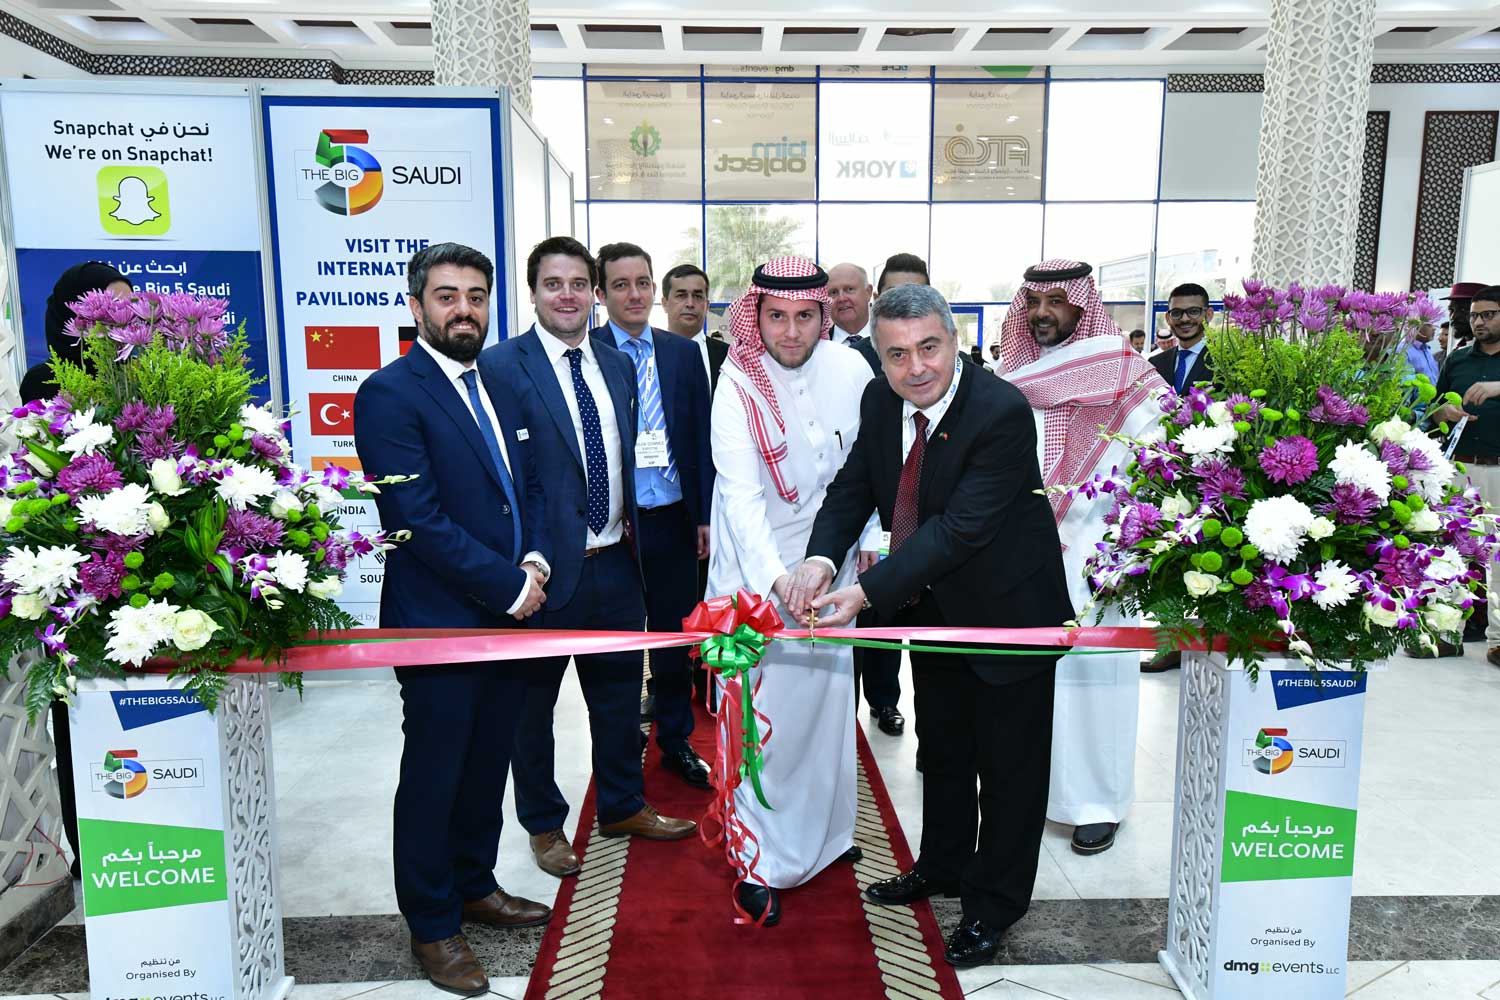 THE GLOBAL CONSTRUCTION INDUSTRY MEETS IN JEDDAH AS THE BIG 5 SAUDI 2019 RE-OPENS ITS DOORS